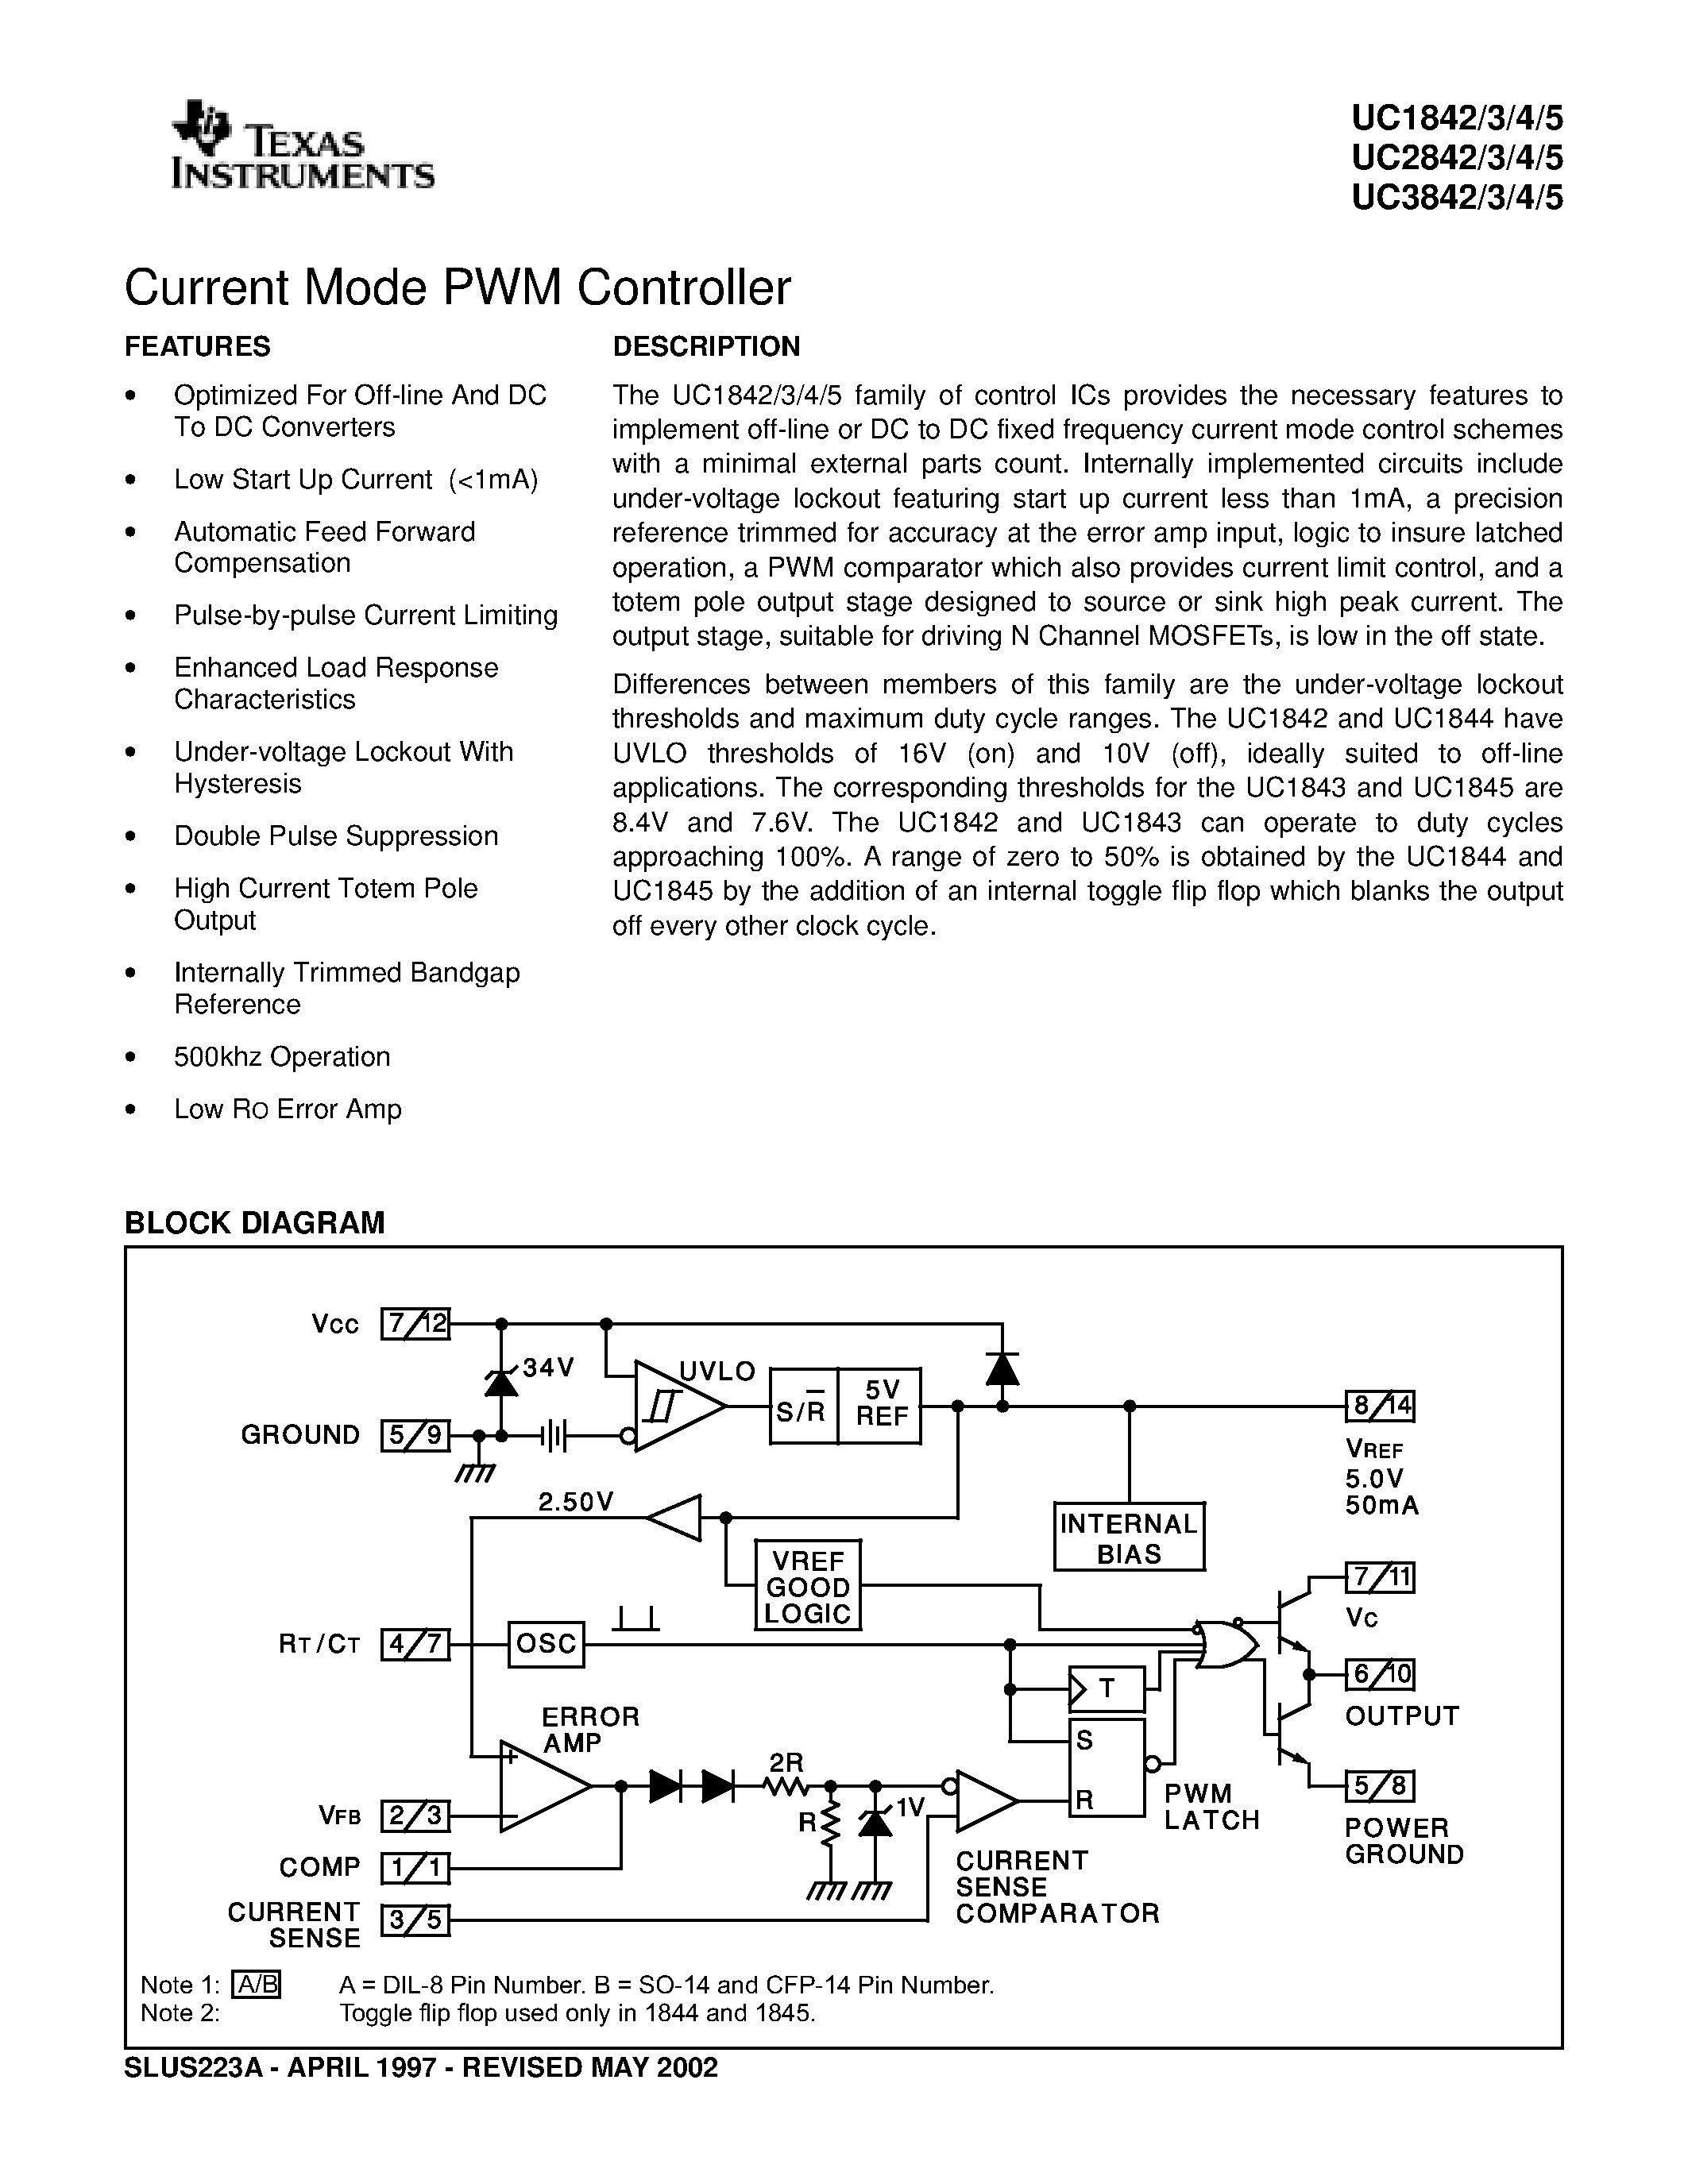 Datasheet UC2845 - Current Mode PWM Controller page 1